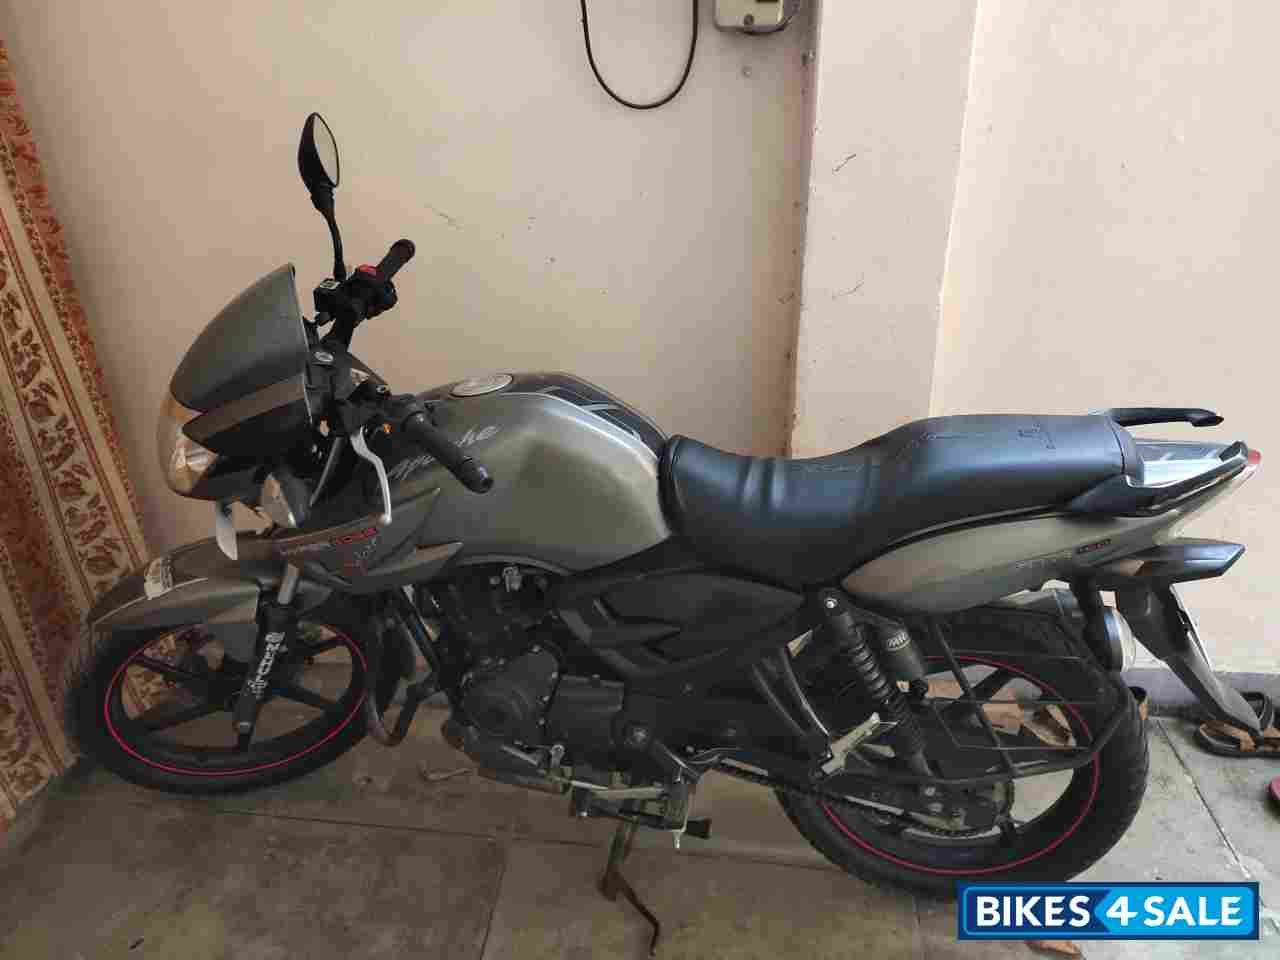 Used 05 Model Tvs Apache Rtr 160 For Sale In Lucknow Id Bikes4sale